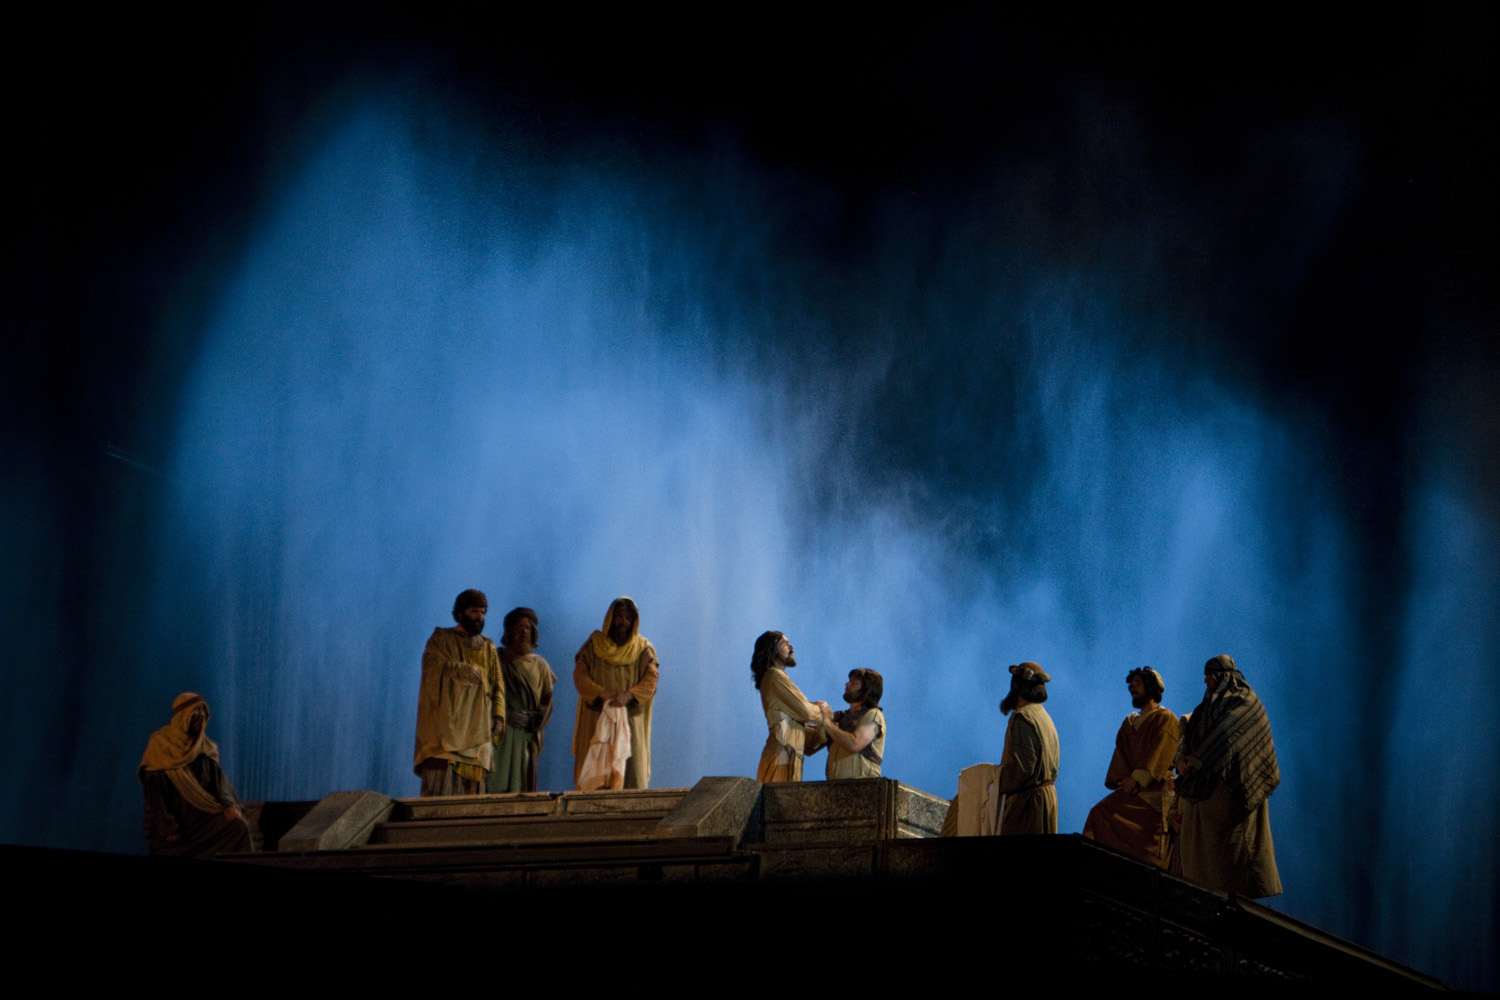 July 13, 2012 - A scene from the 75th anniversary of the Hill Cumorah Pageant in Palmyra, N.Y. The theatrical pageant presents ten scenes from the Book of Mormon and has had few modifications since it began in 1937.